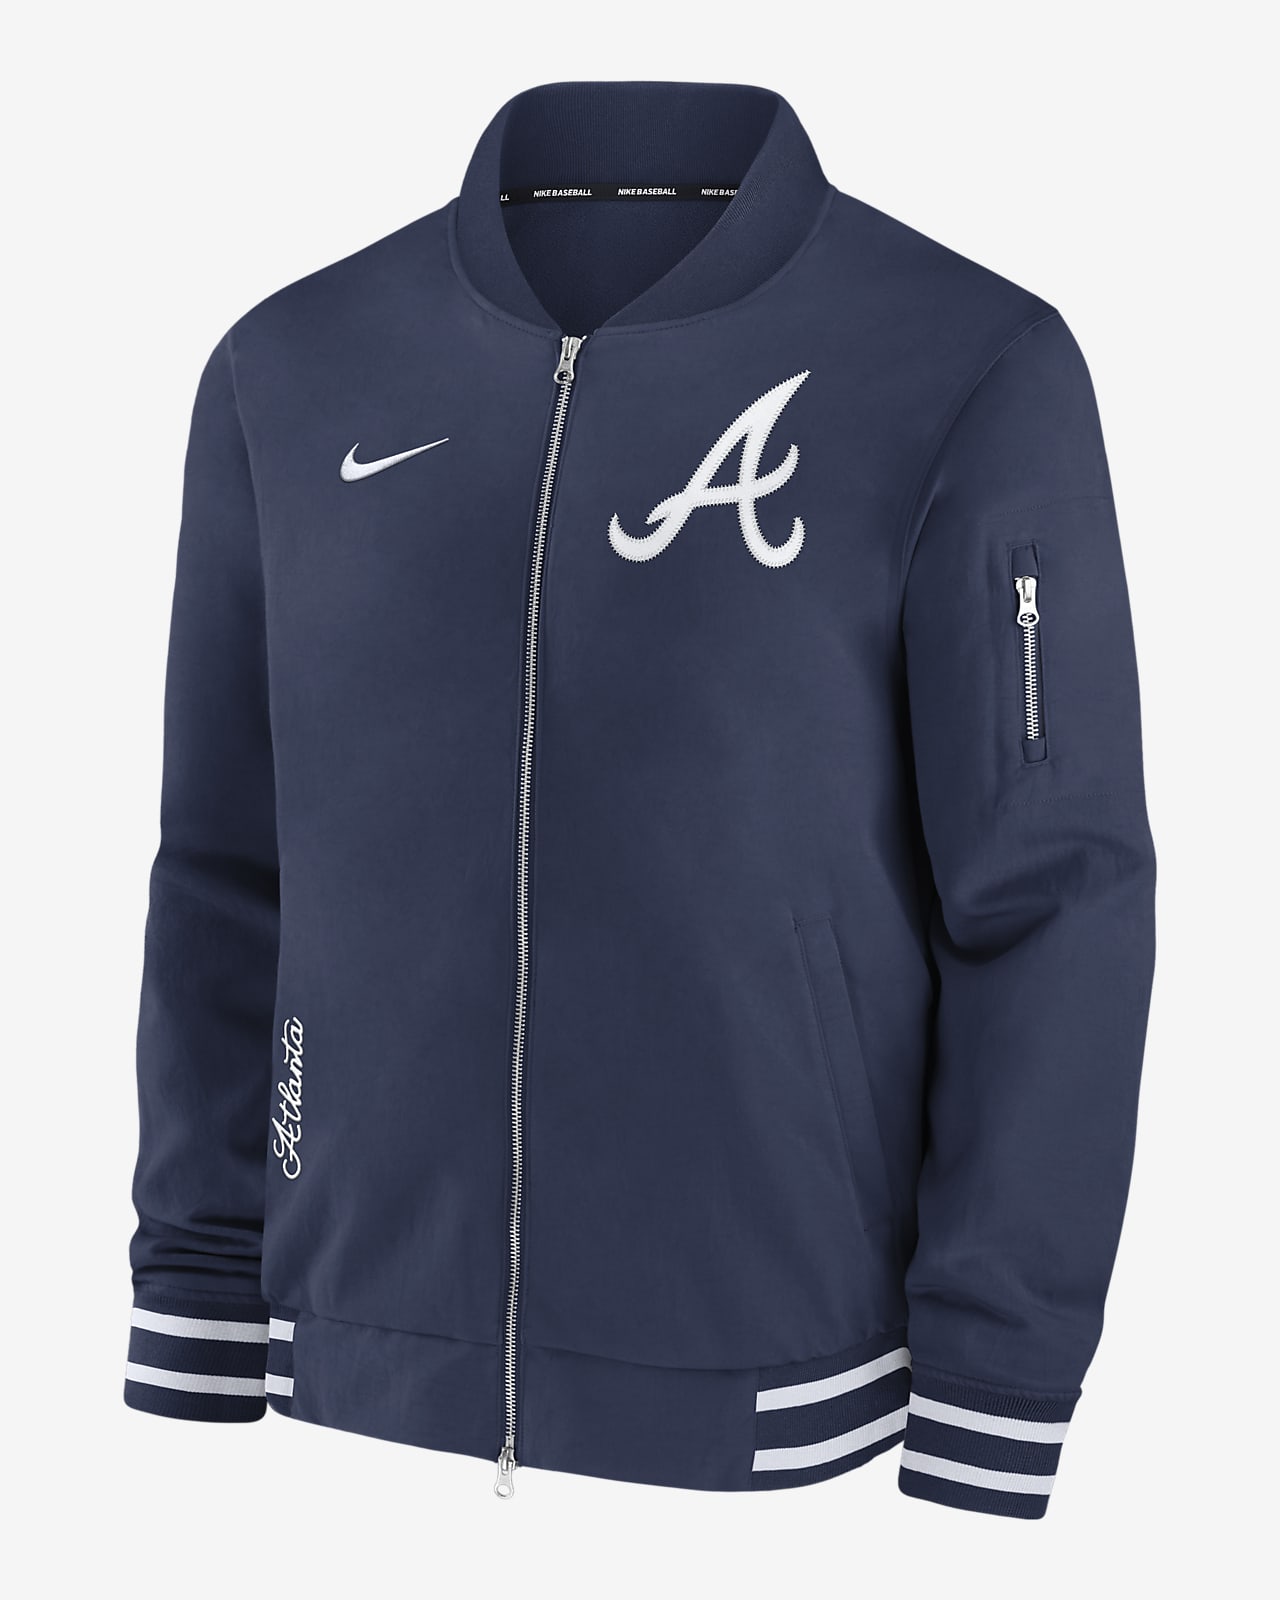 https://static.nike.com/a/images/t_PDP_1280_v1/f_auto,q_auto:eco/237e0d4a-8f8b-476b-84a0-40378c5d85c3/atlanta-braves-authentic-collection-mens-full-zip-bomber-jacket-Pph4Bc.png